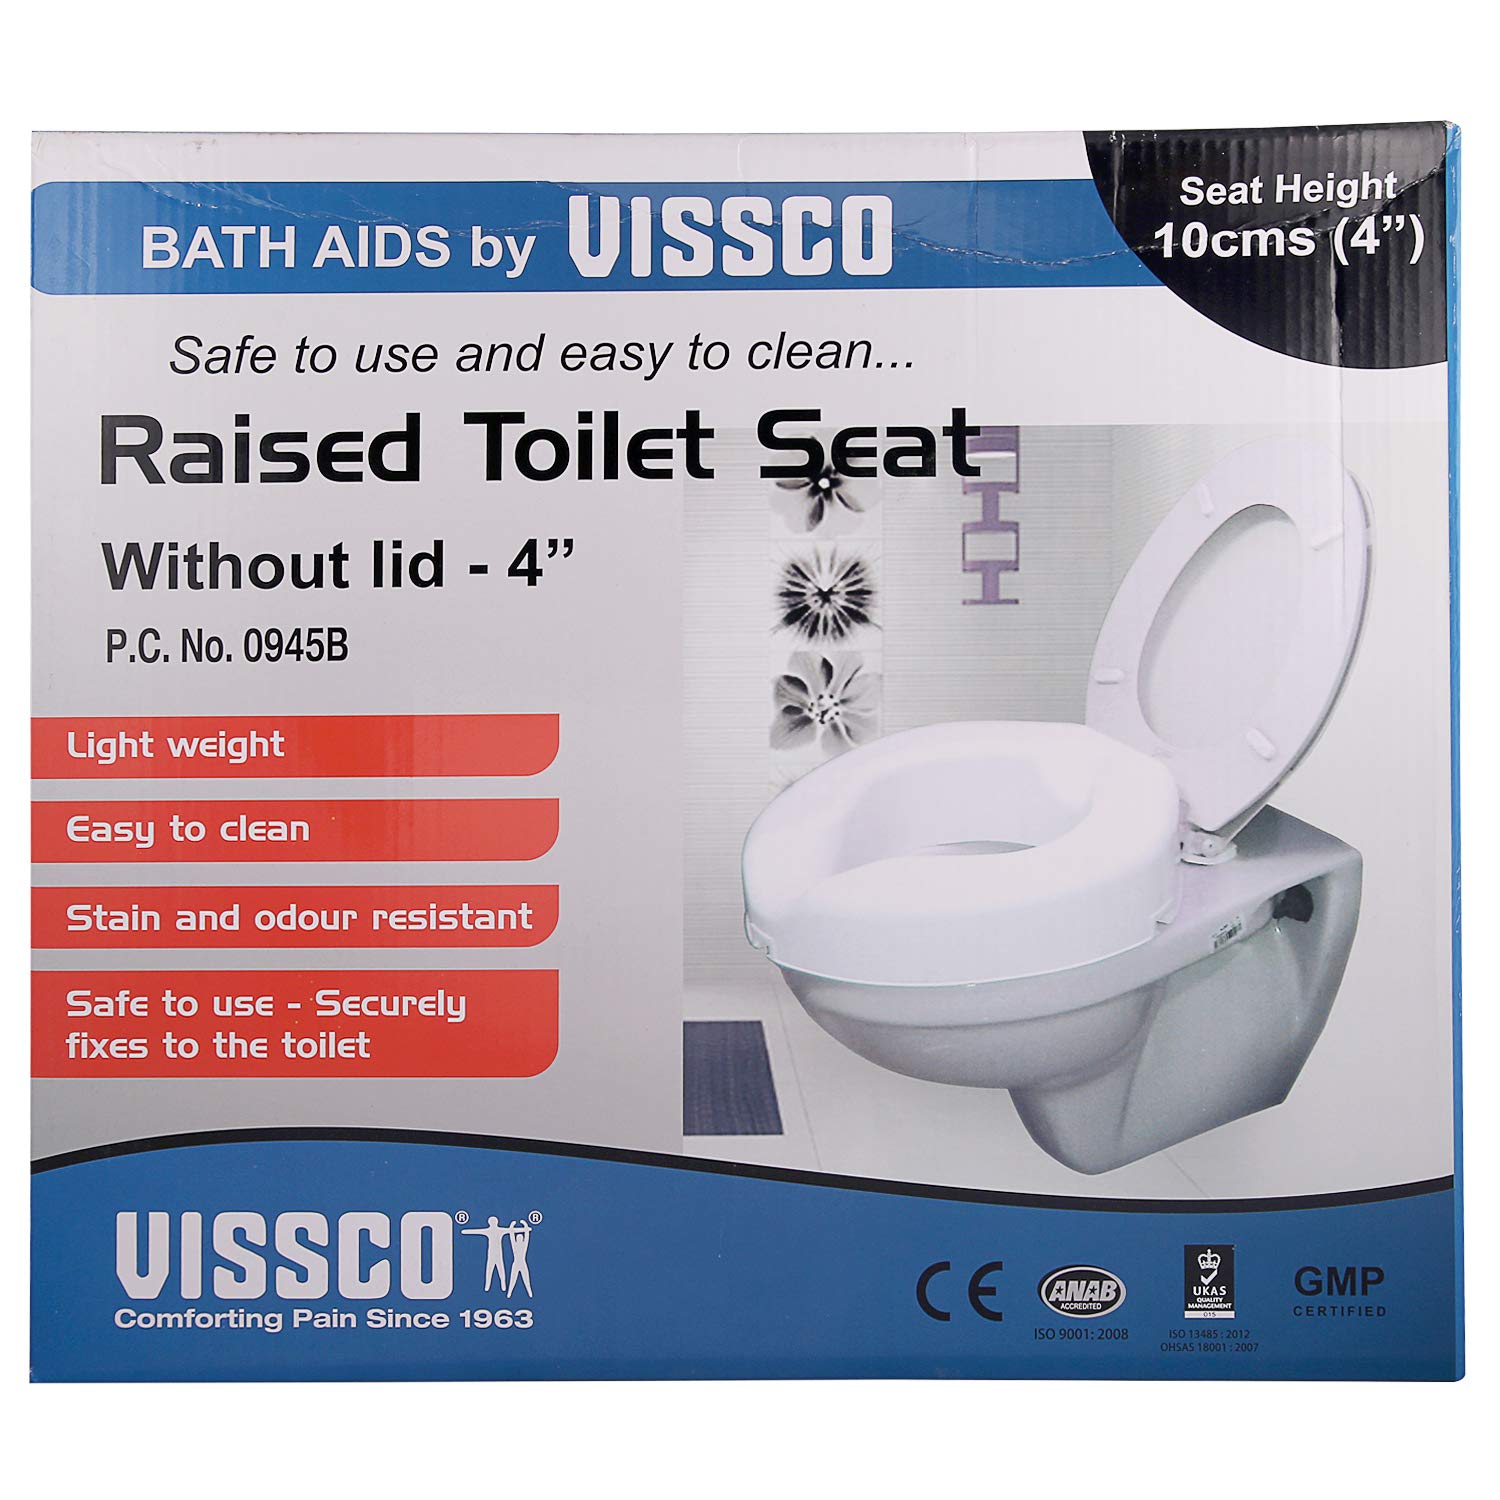 Toilet Seat 4 Inch with out lid